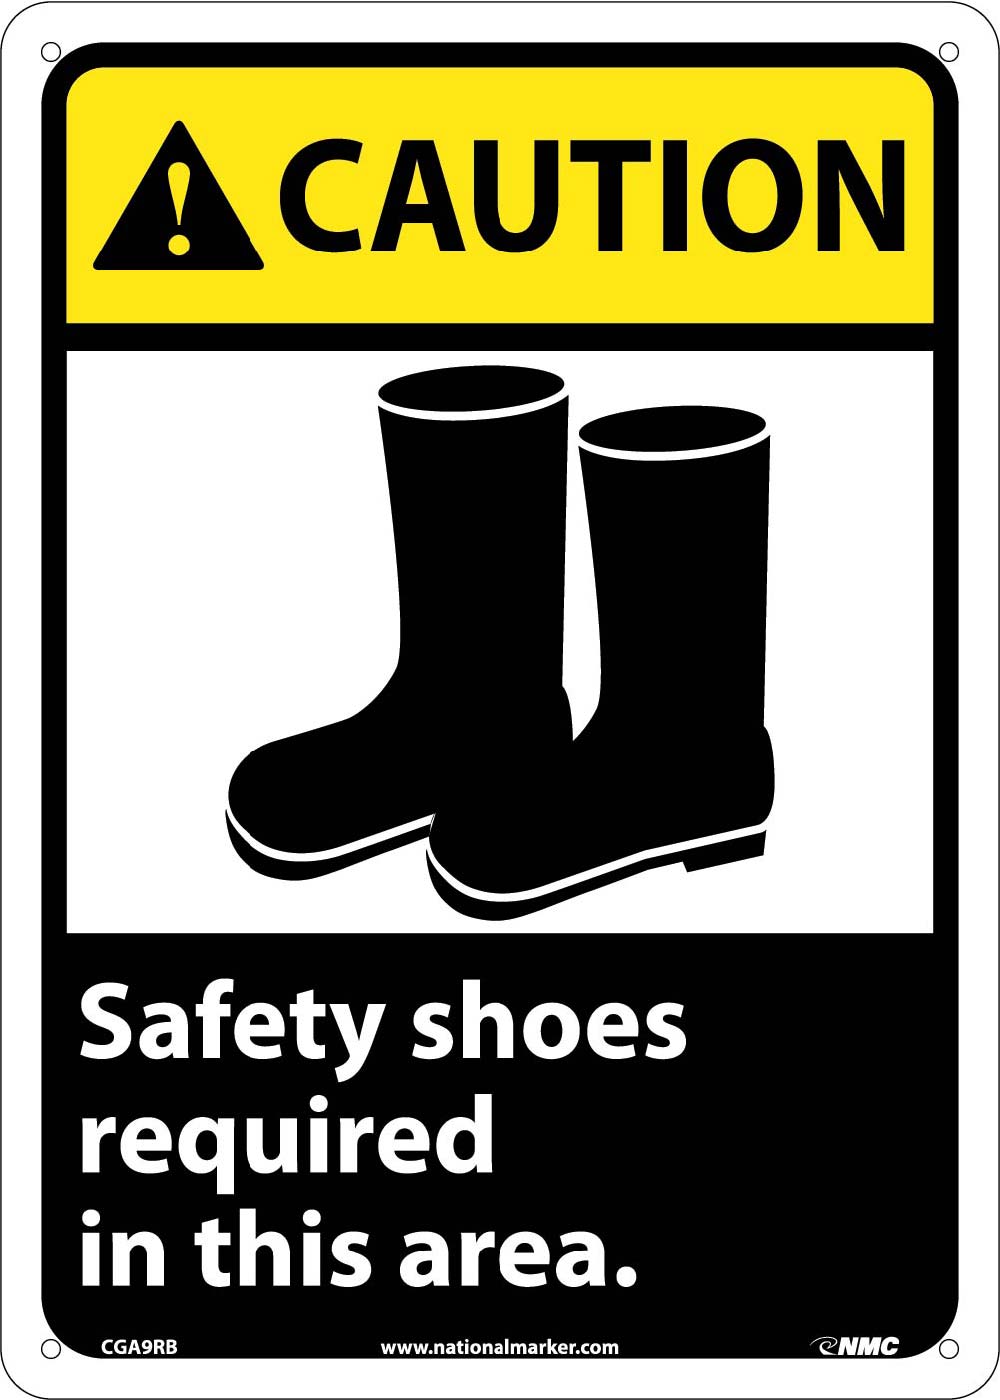 Tatra Safety Boots Shoes Inc